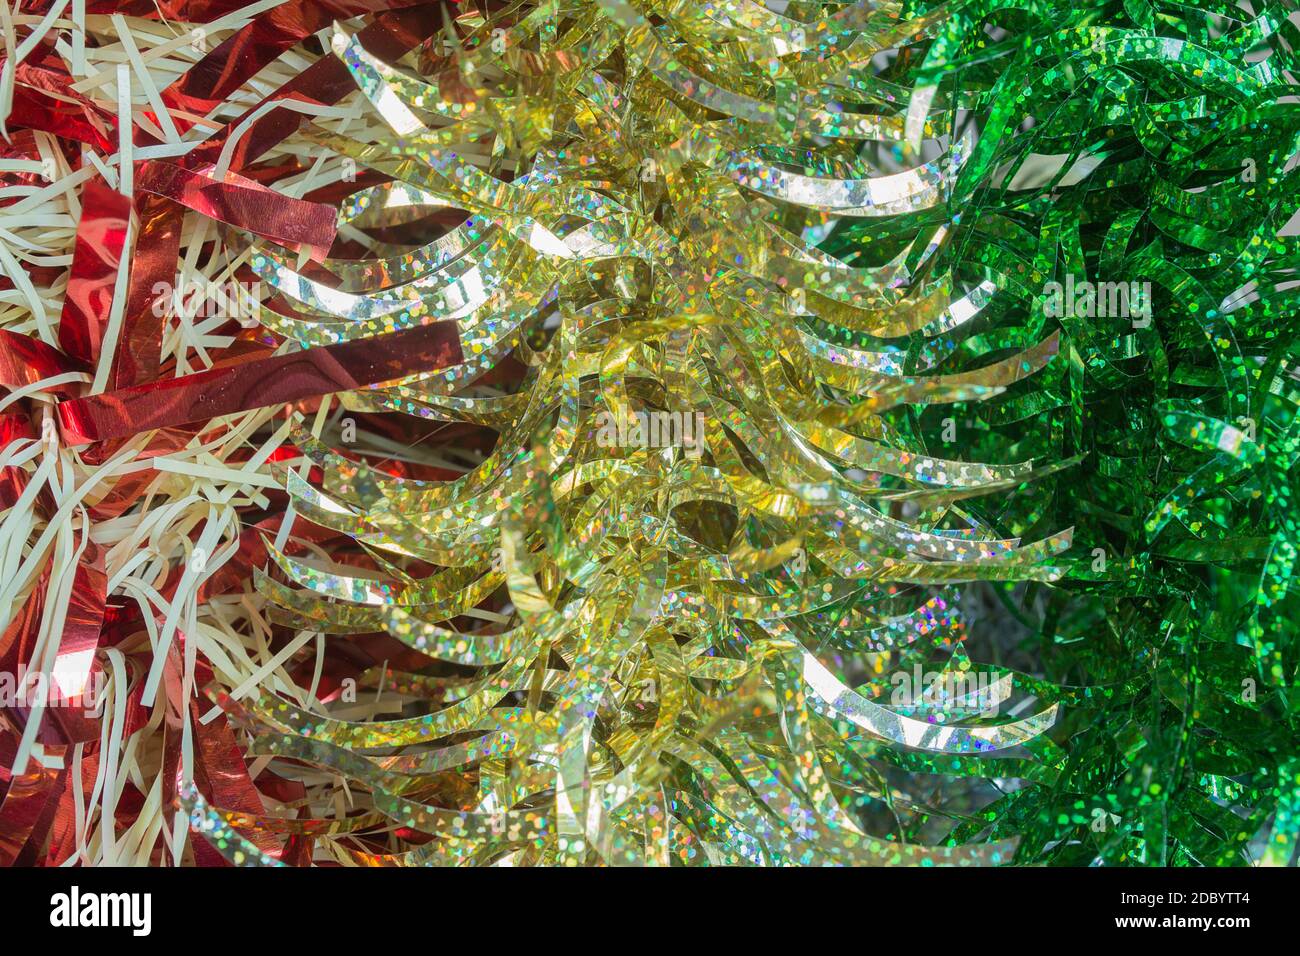 A fringed strip of a type of tissue or shiny paper that is used to decorate, especially the Christmas tree. Stock Photo